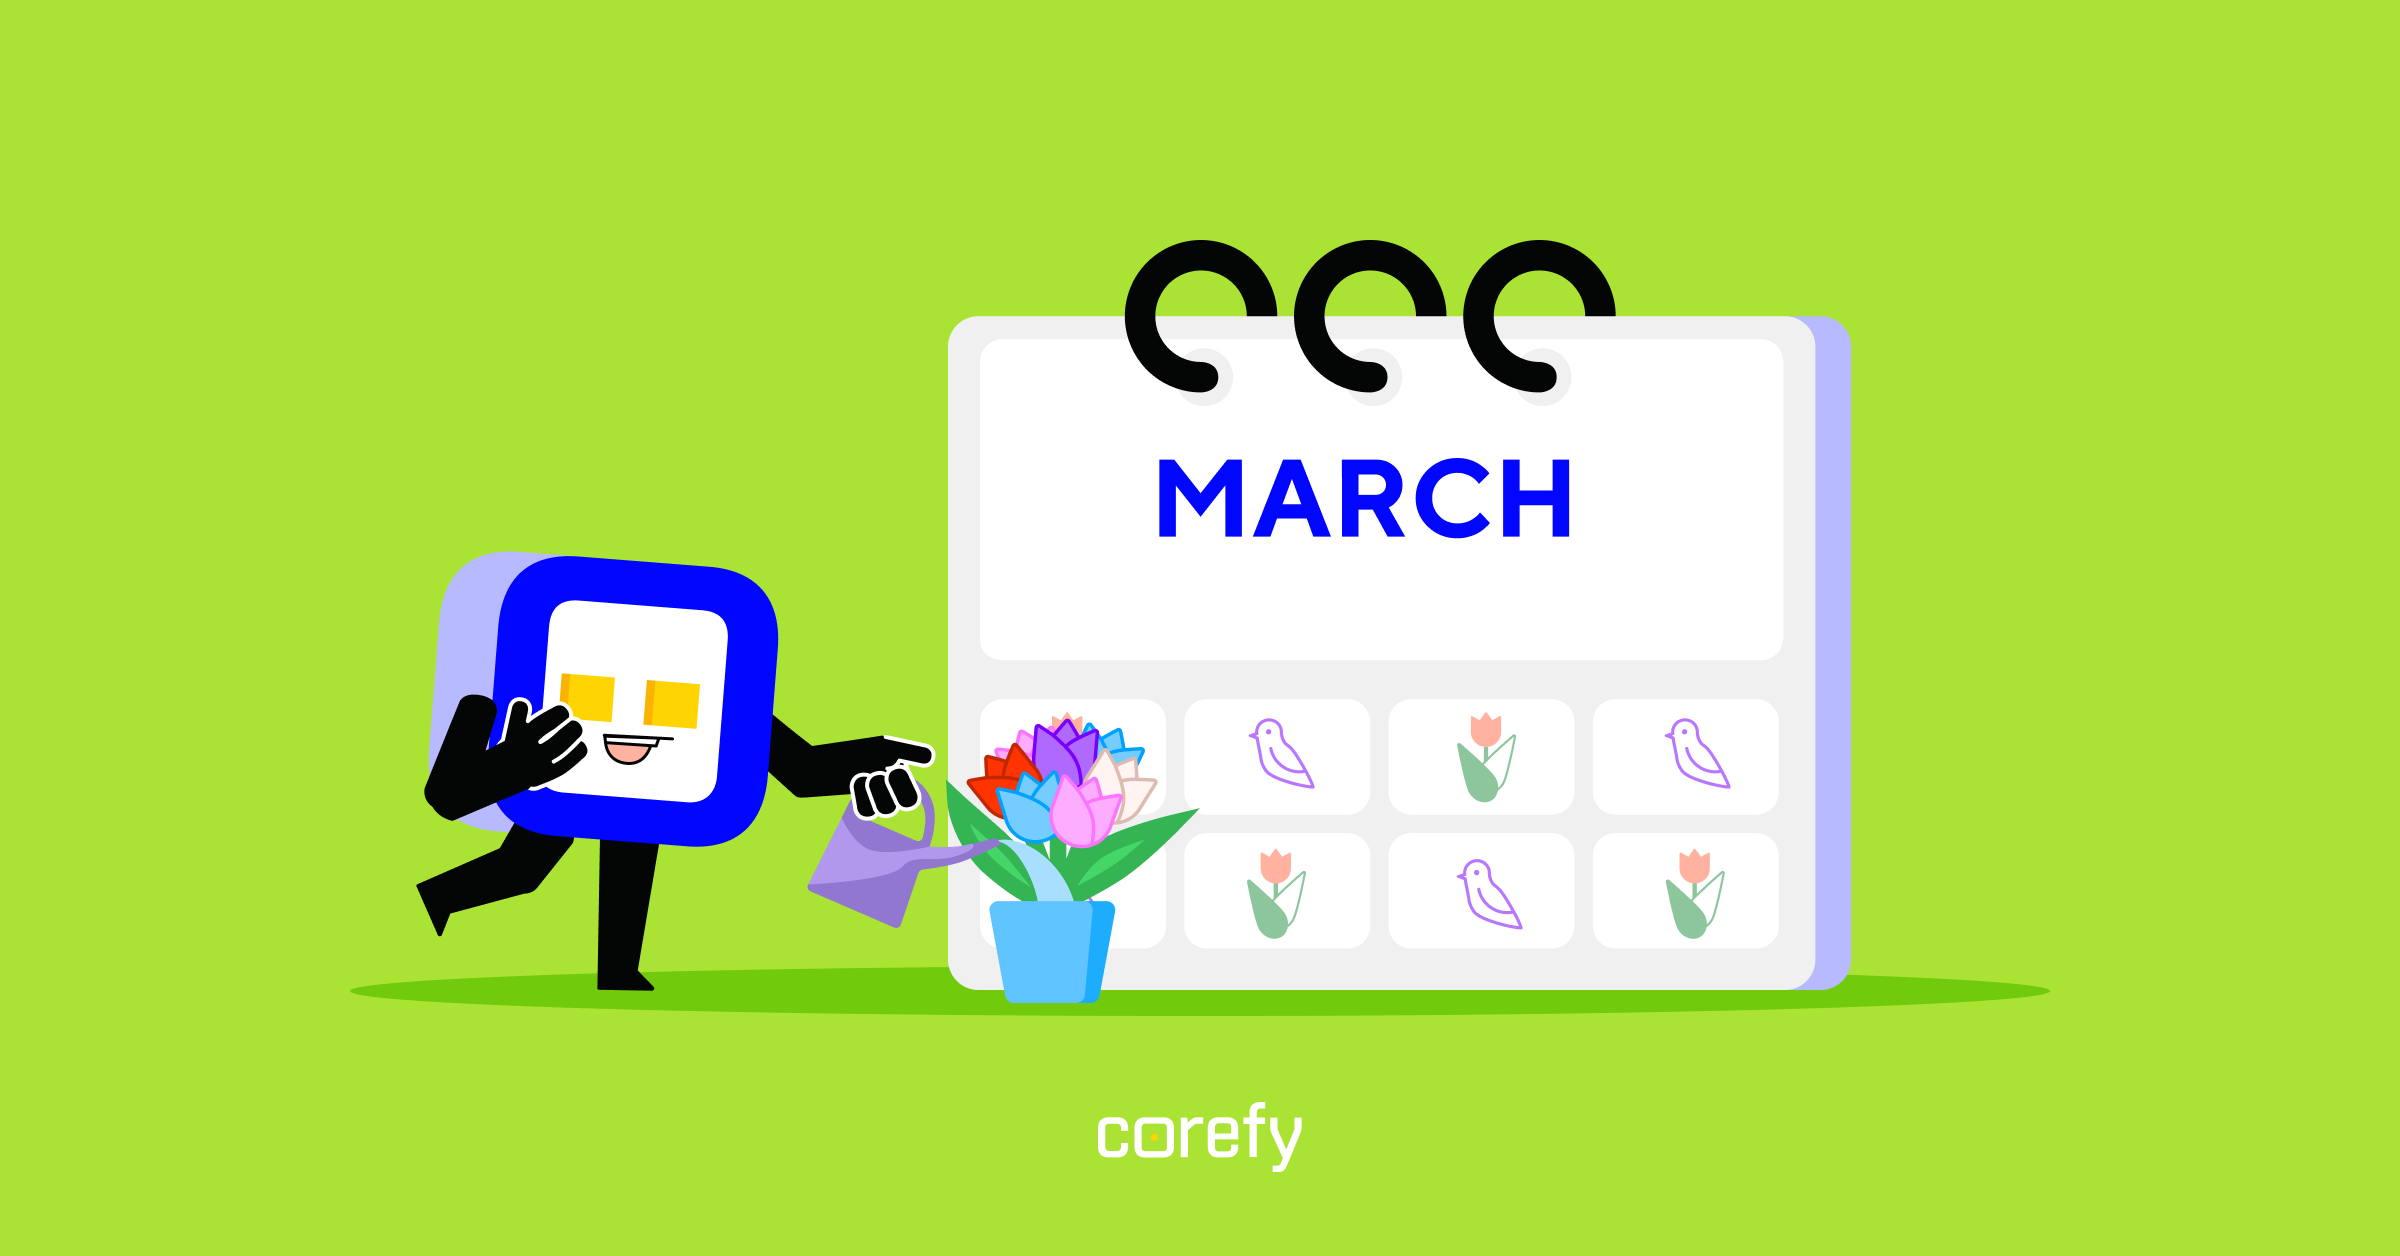 Corefy’s monthly updates: March 2022